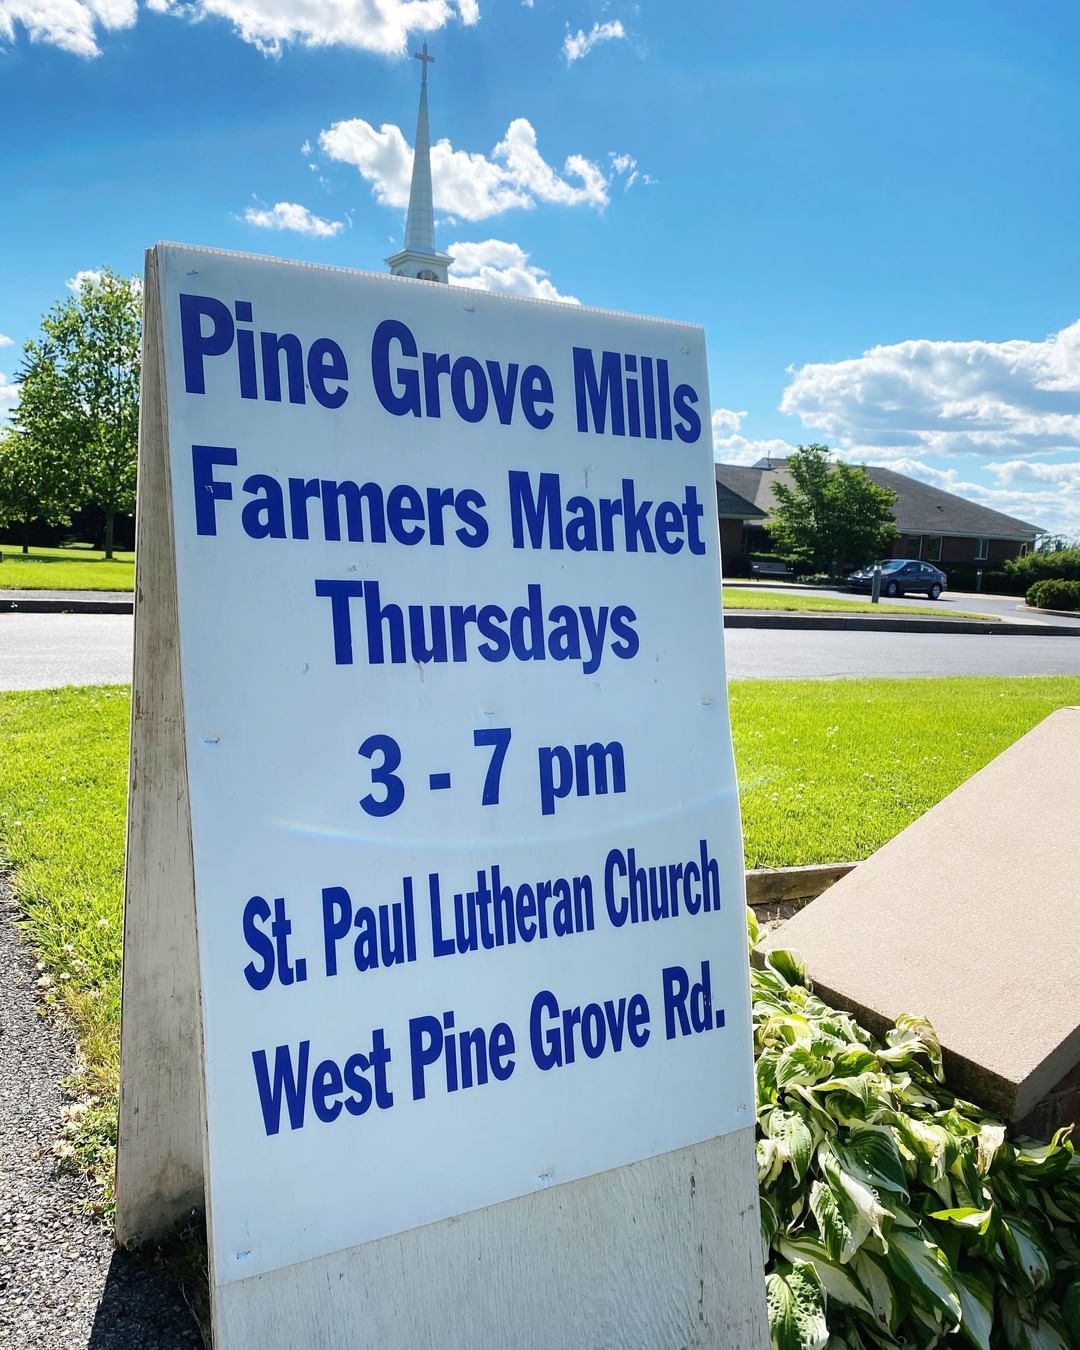 Venturing over to the Pine Grove Mills Farmers' Market June 18? They'll be at Saint Paul’s Lutheran Church from 3:00 p.m.-7:00 p.m. every Thursday hosting local businesses from Centre, Huntingdon and Mifflin counties!